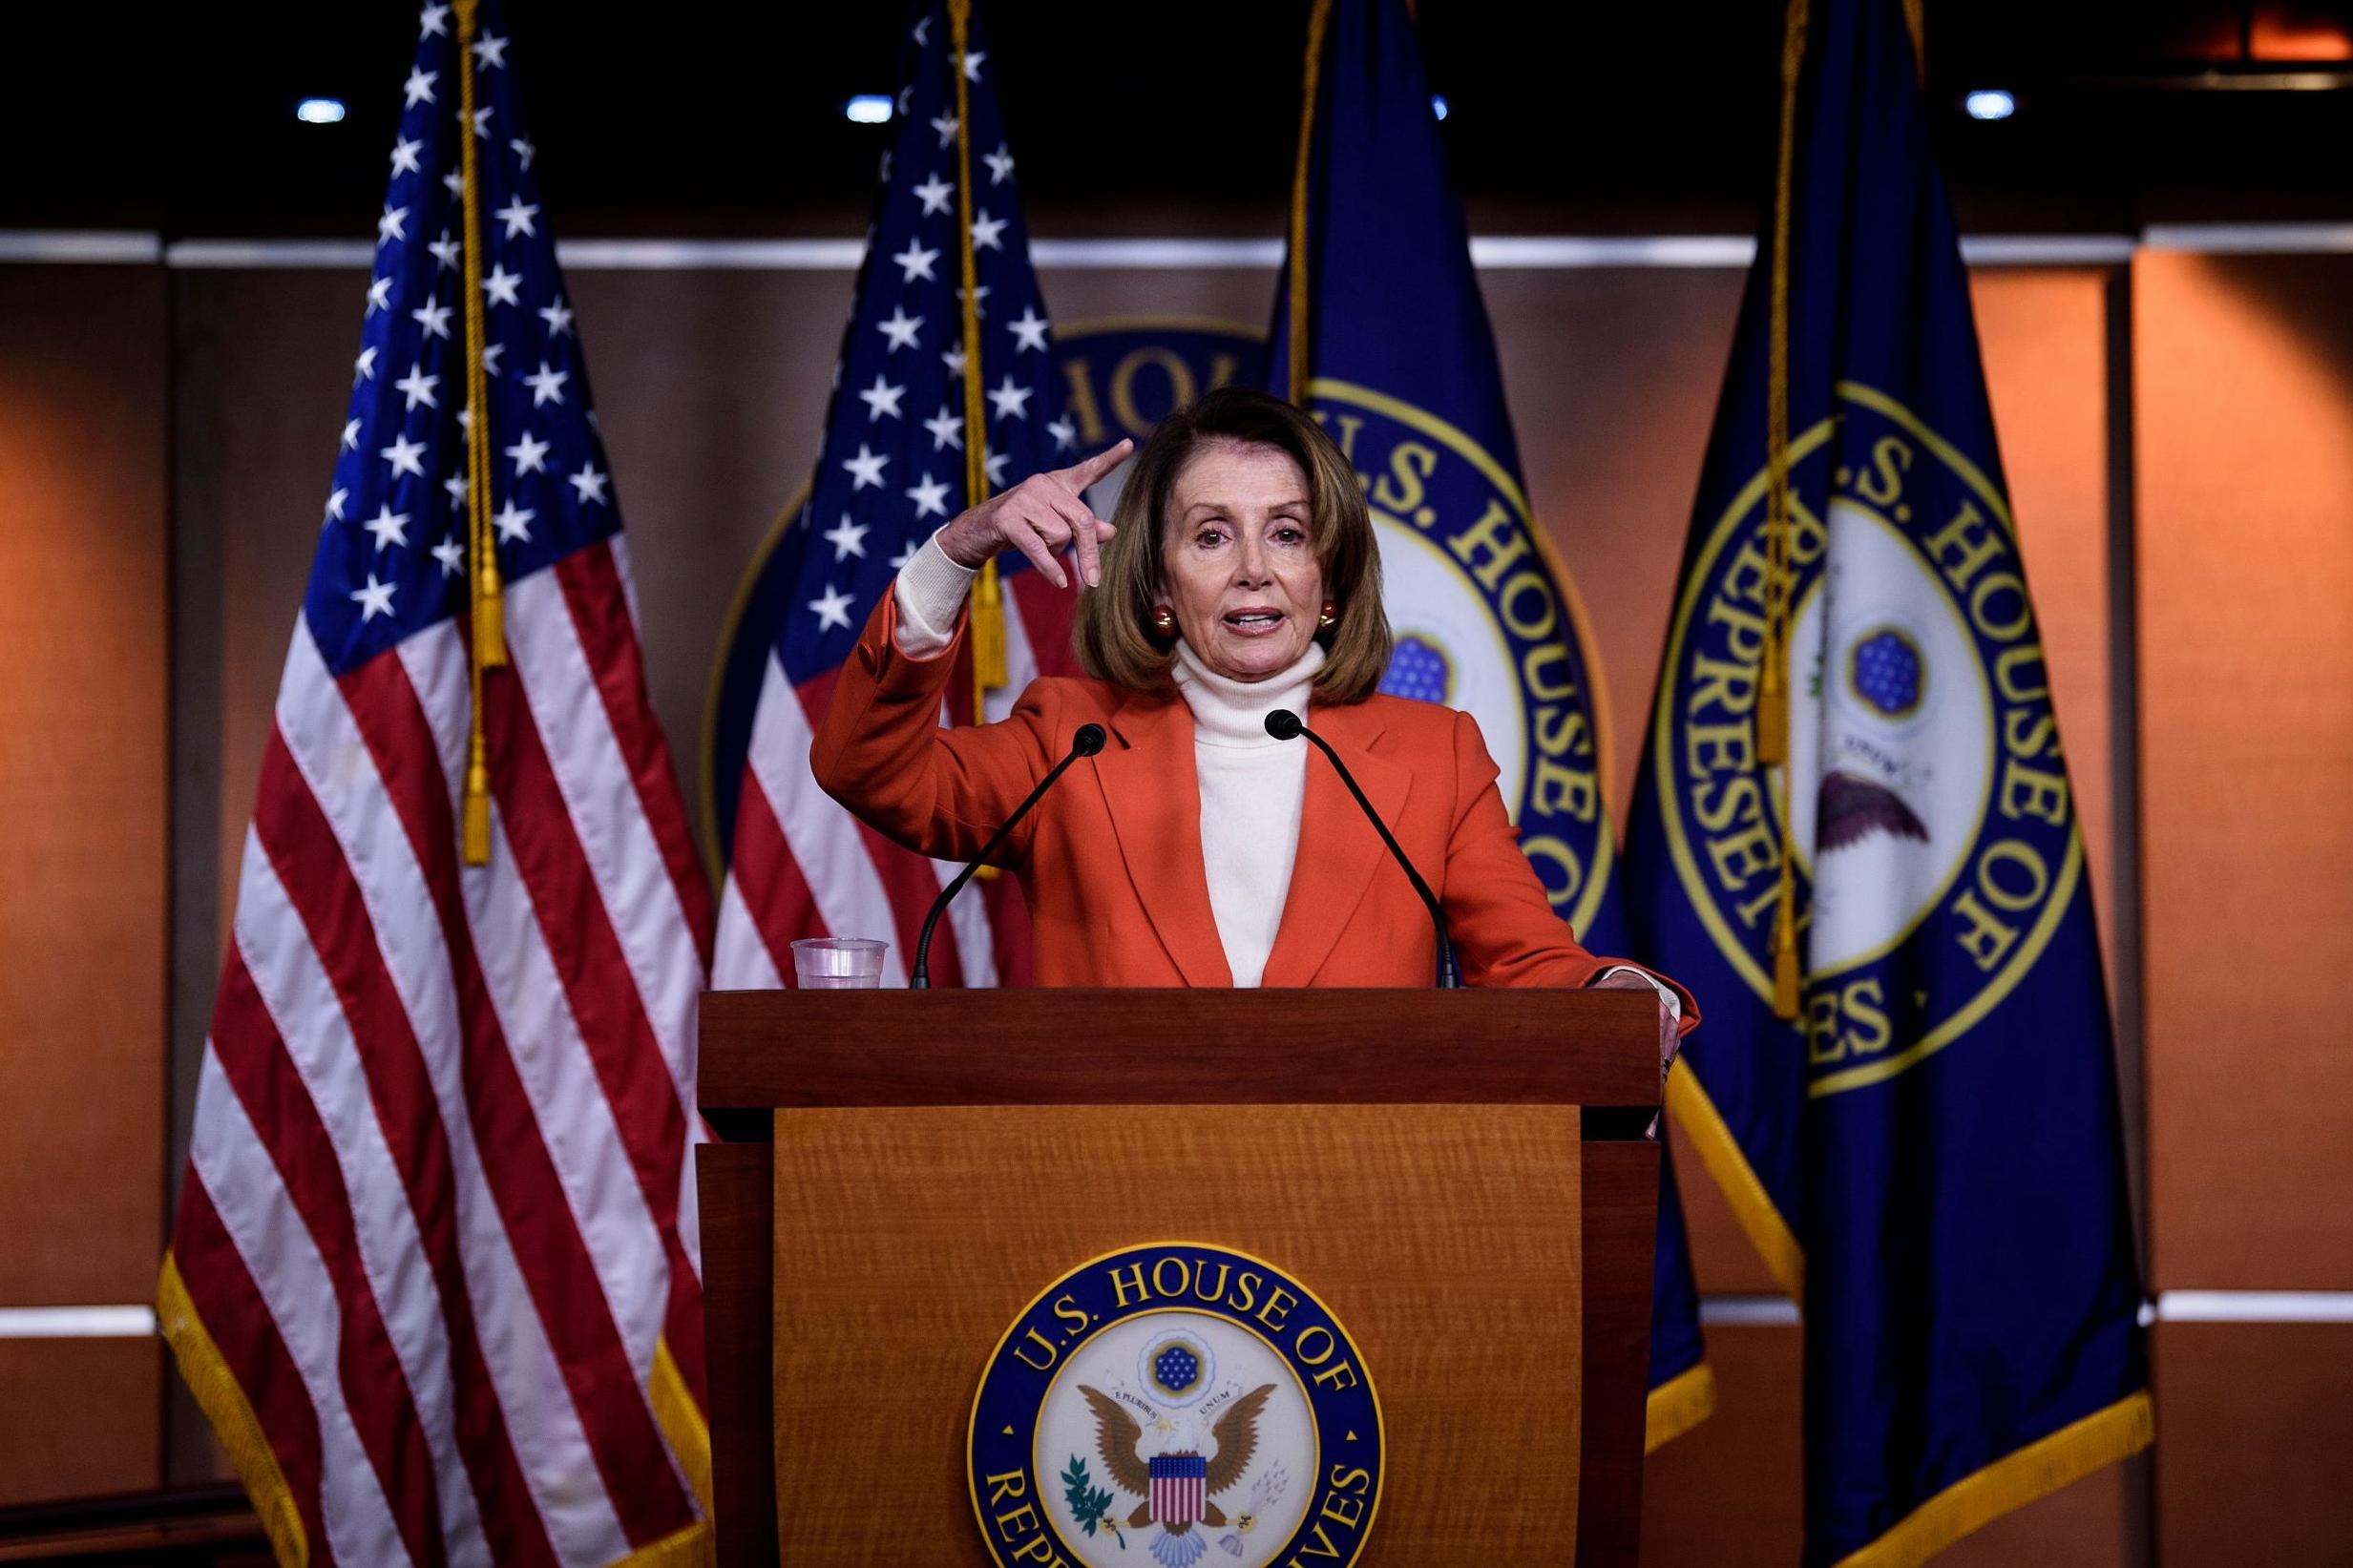 House Minority Leader Nancy Pelosi said she has the votes to become the new Speaker of the House when Democrats regain control of the chamber in 2019